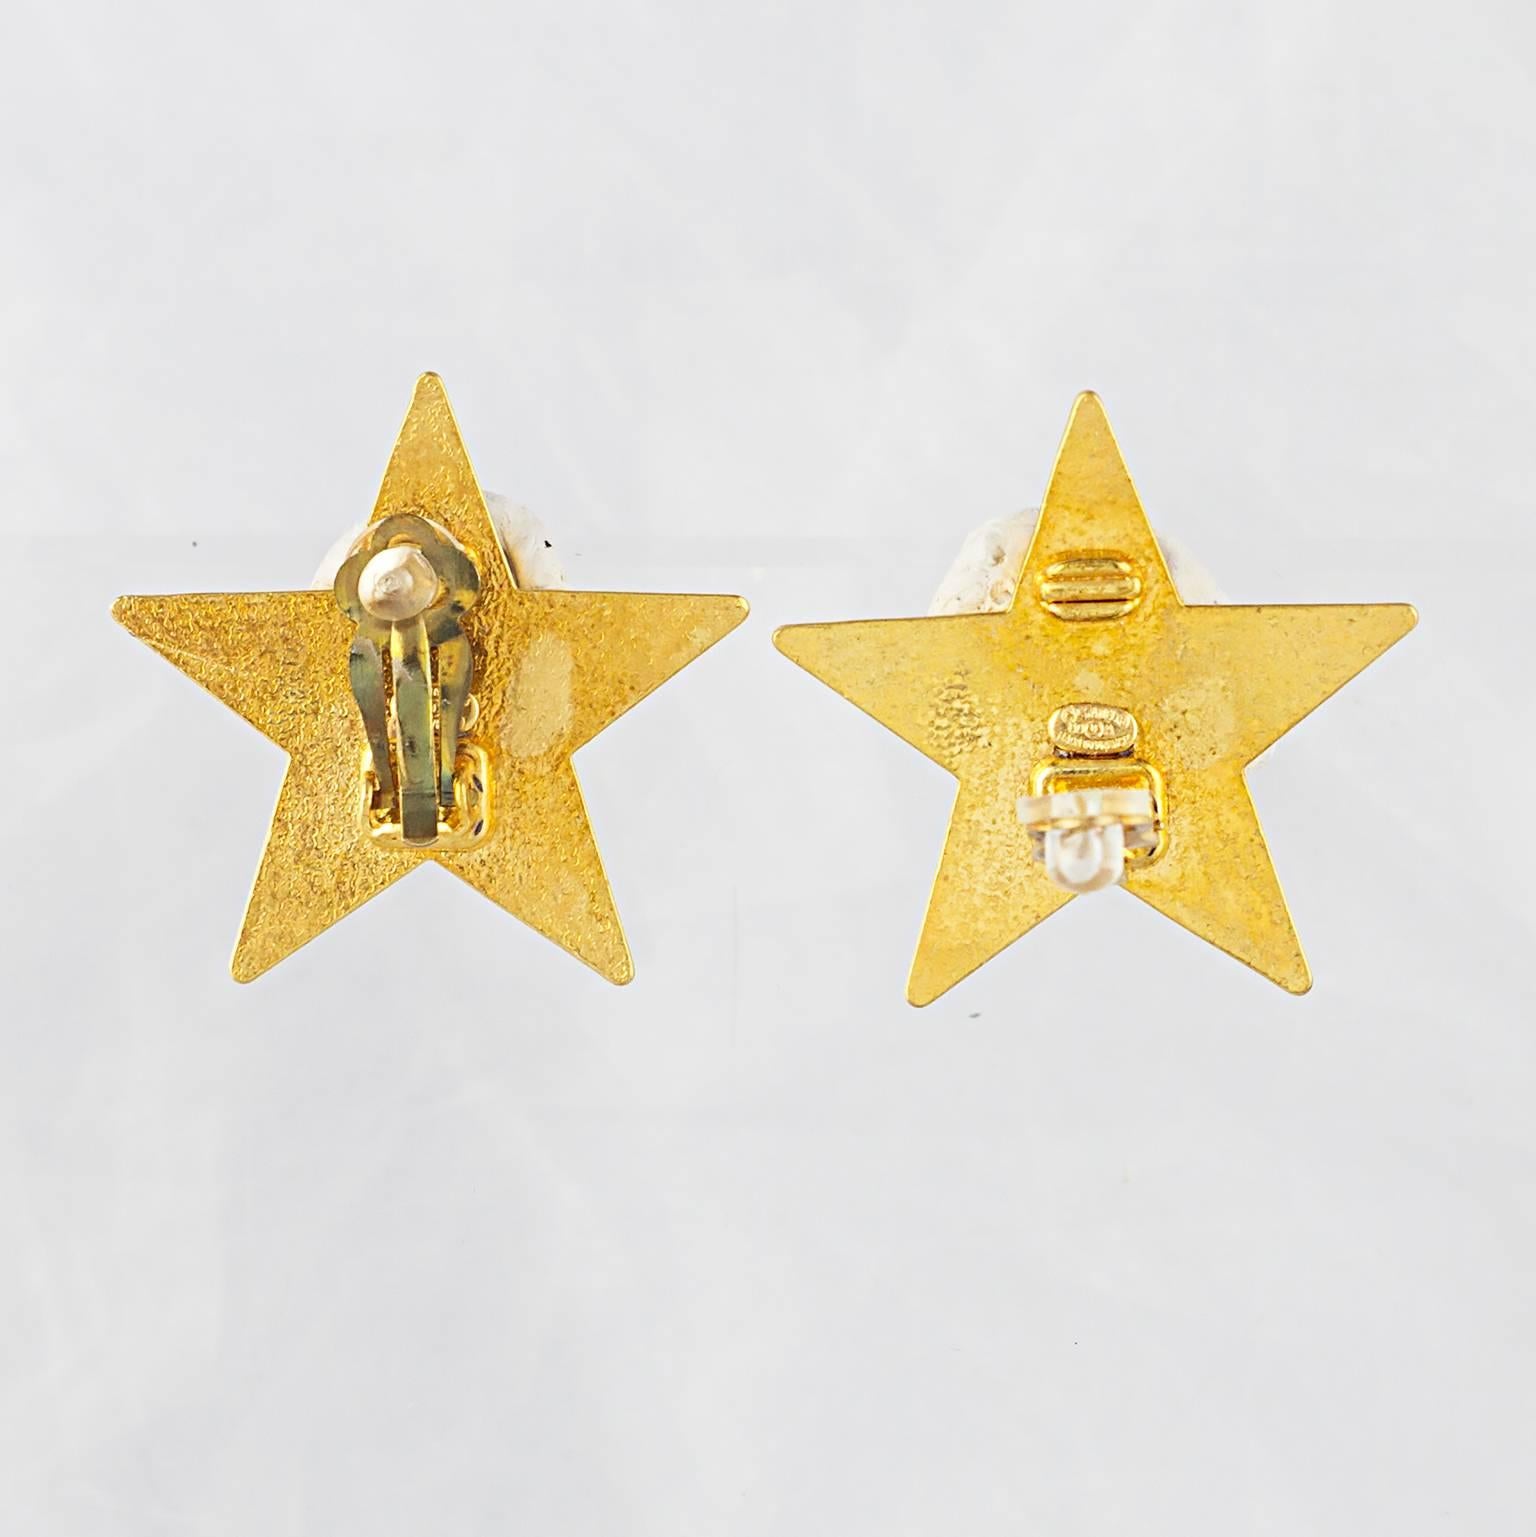 A pair of Chanel CC clip-on star earrings in gold plate and enamel.
Made for the Autumn collection 2000.
Fully signed. 
In a great condition.
Don't hesitate to contact us with any queries or image requests.